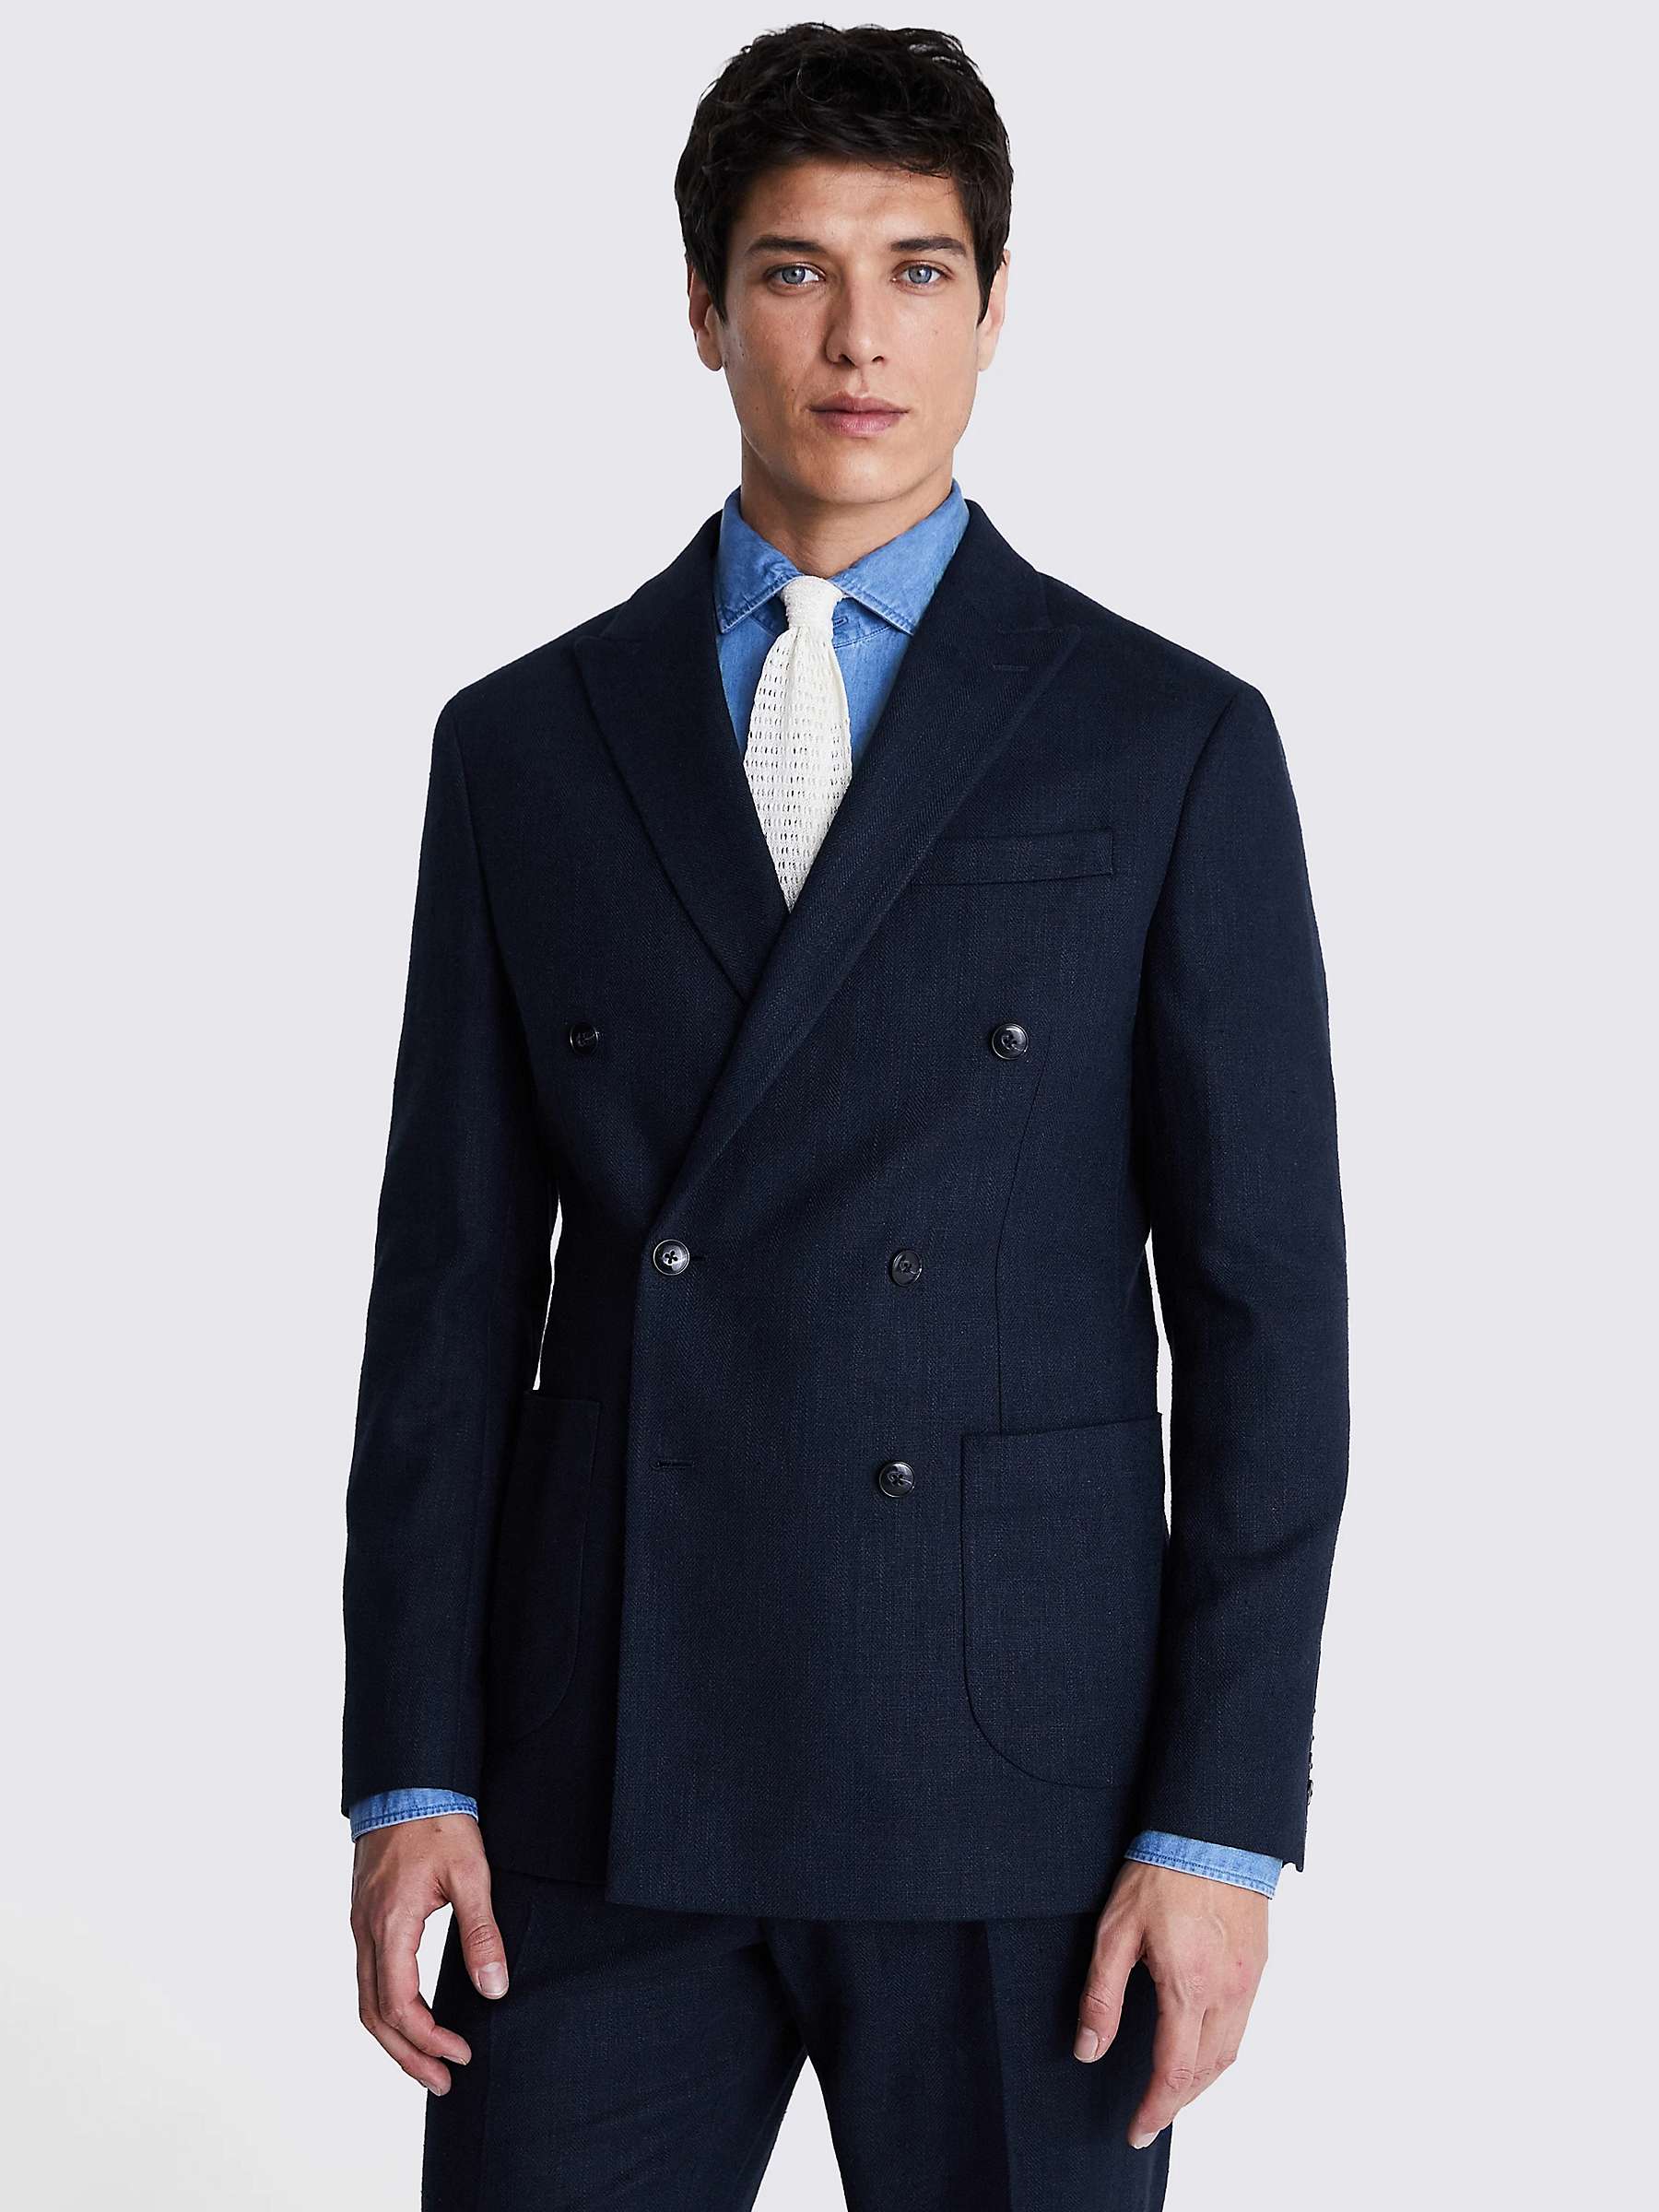 Buy Moss Tailored Fit Double Breasted Herringbone Suit Jacket, Navy Online at johnlewis.com